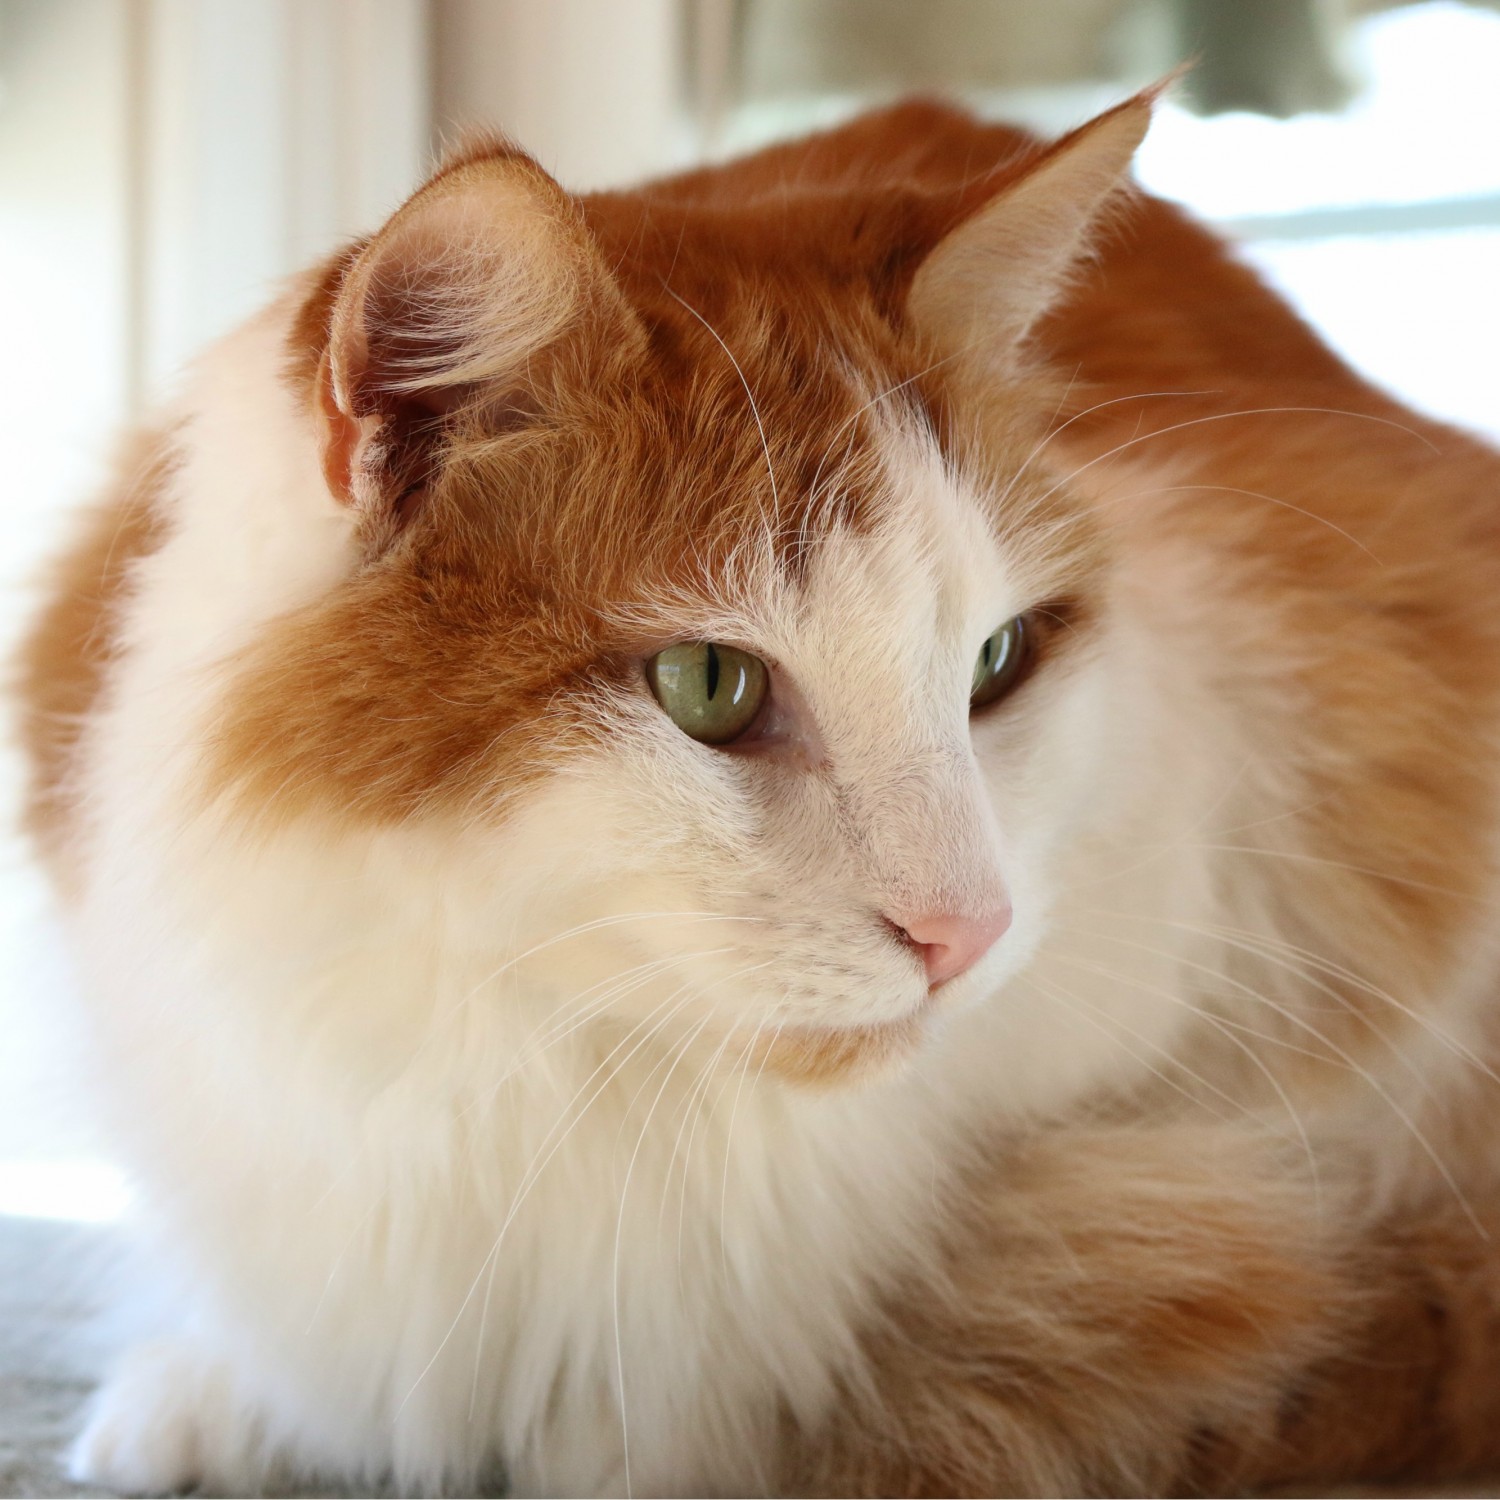 Image of an orange and white cat